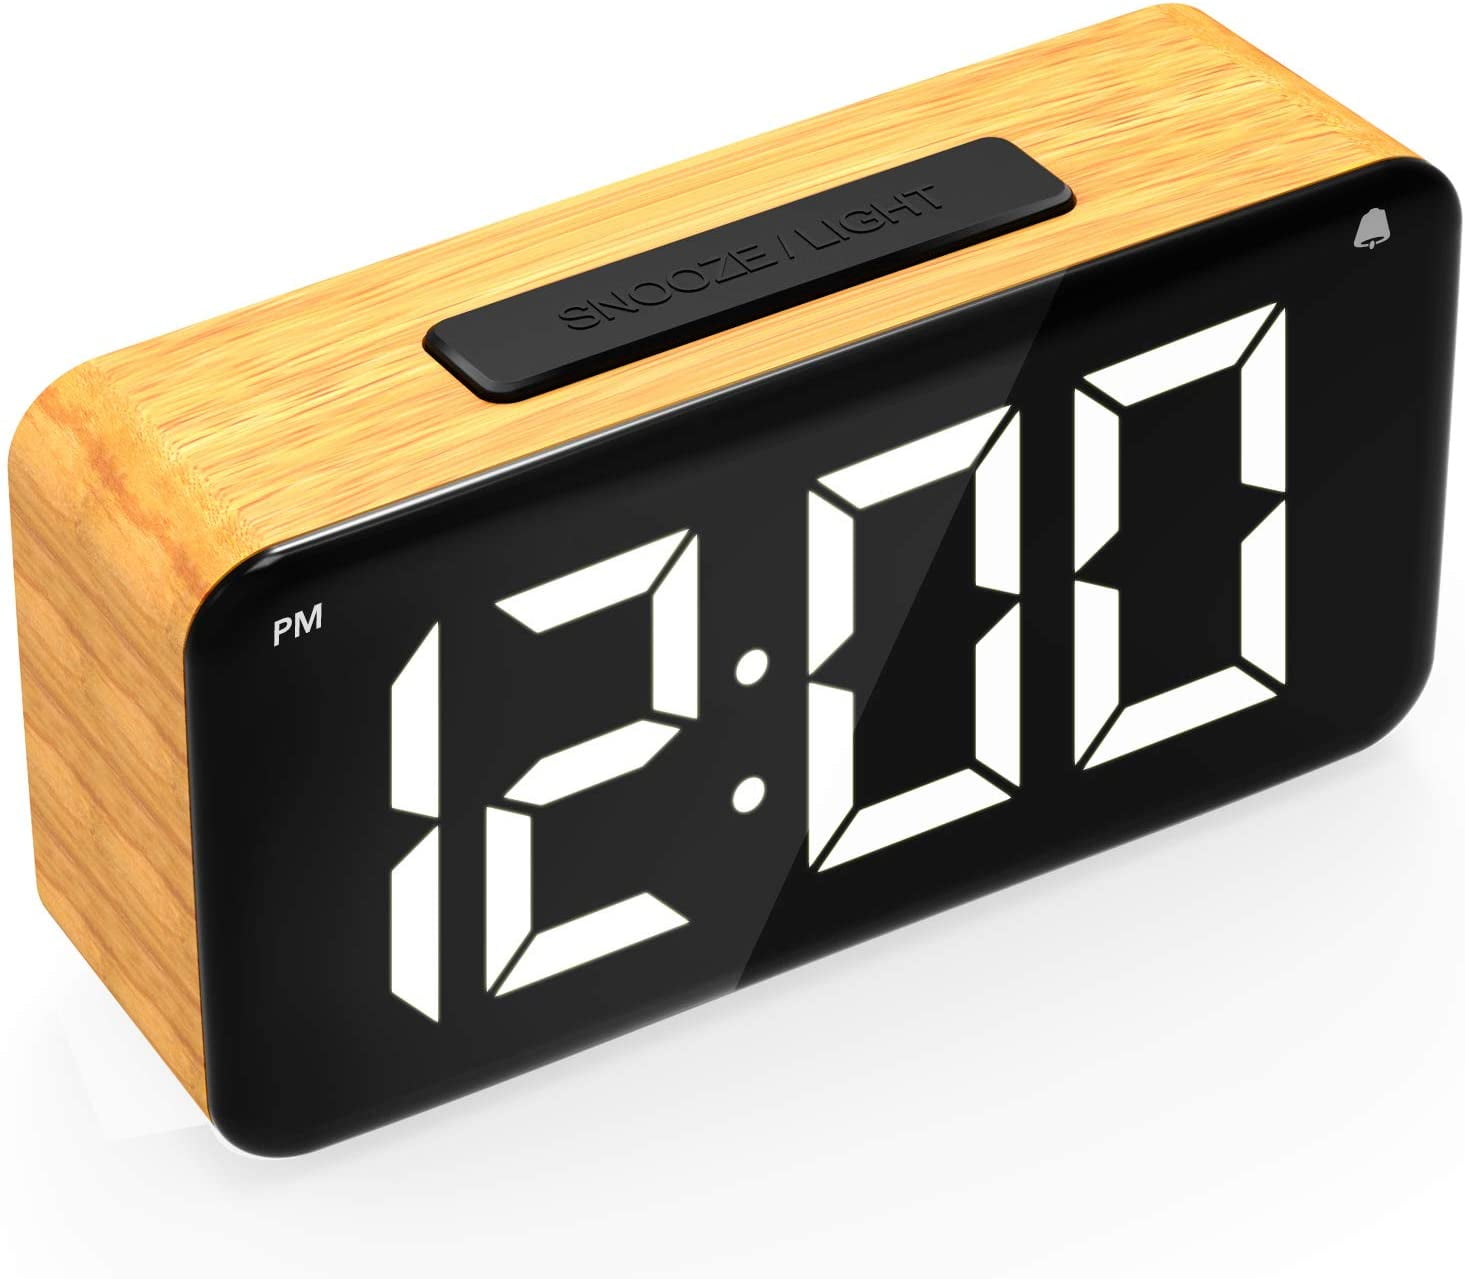 US Large LED Digital Alarm Snooze Clock Voice Control Time Display 5" Screen New 